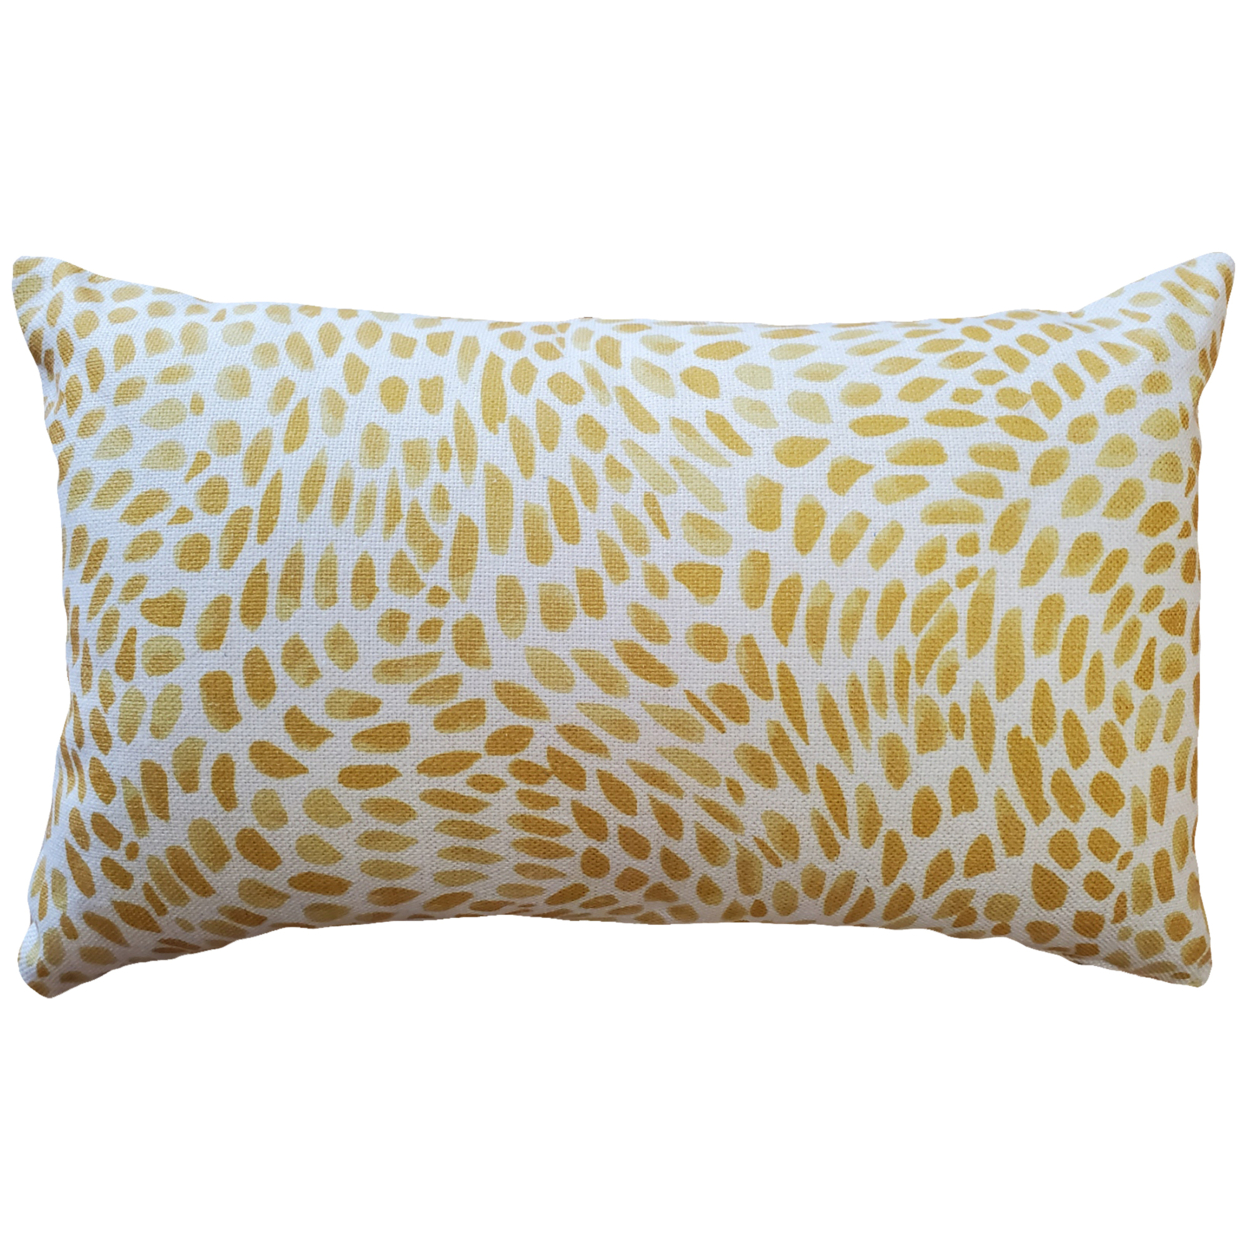 Matisse Dots Golden Yellow Throw Pillow 12x19 Inches Square, Complete Pillow With Polyfill Pillow Insert